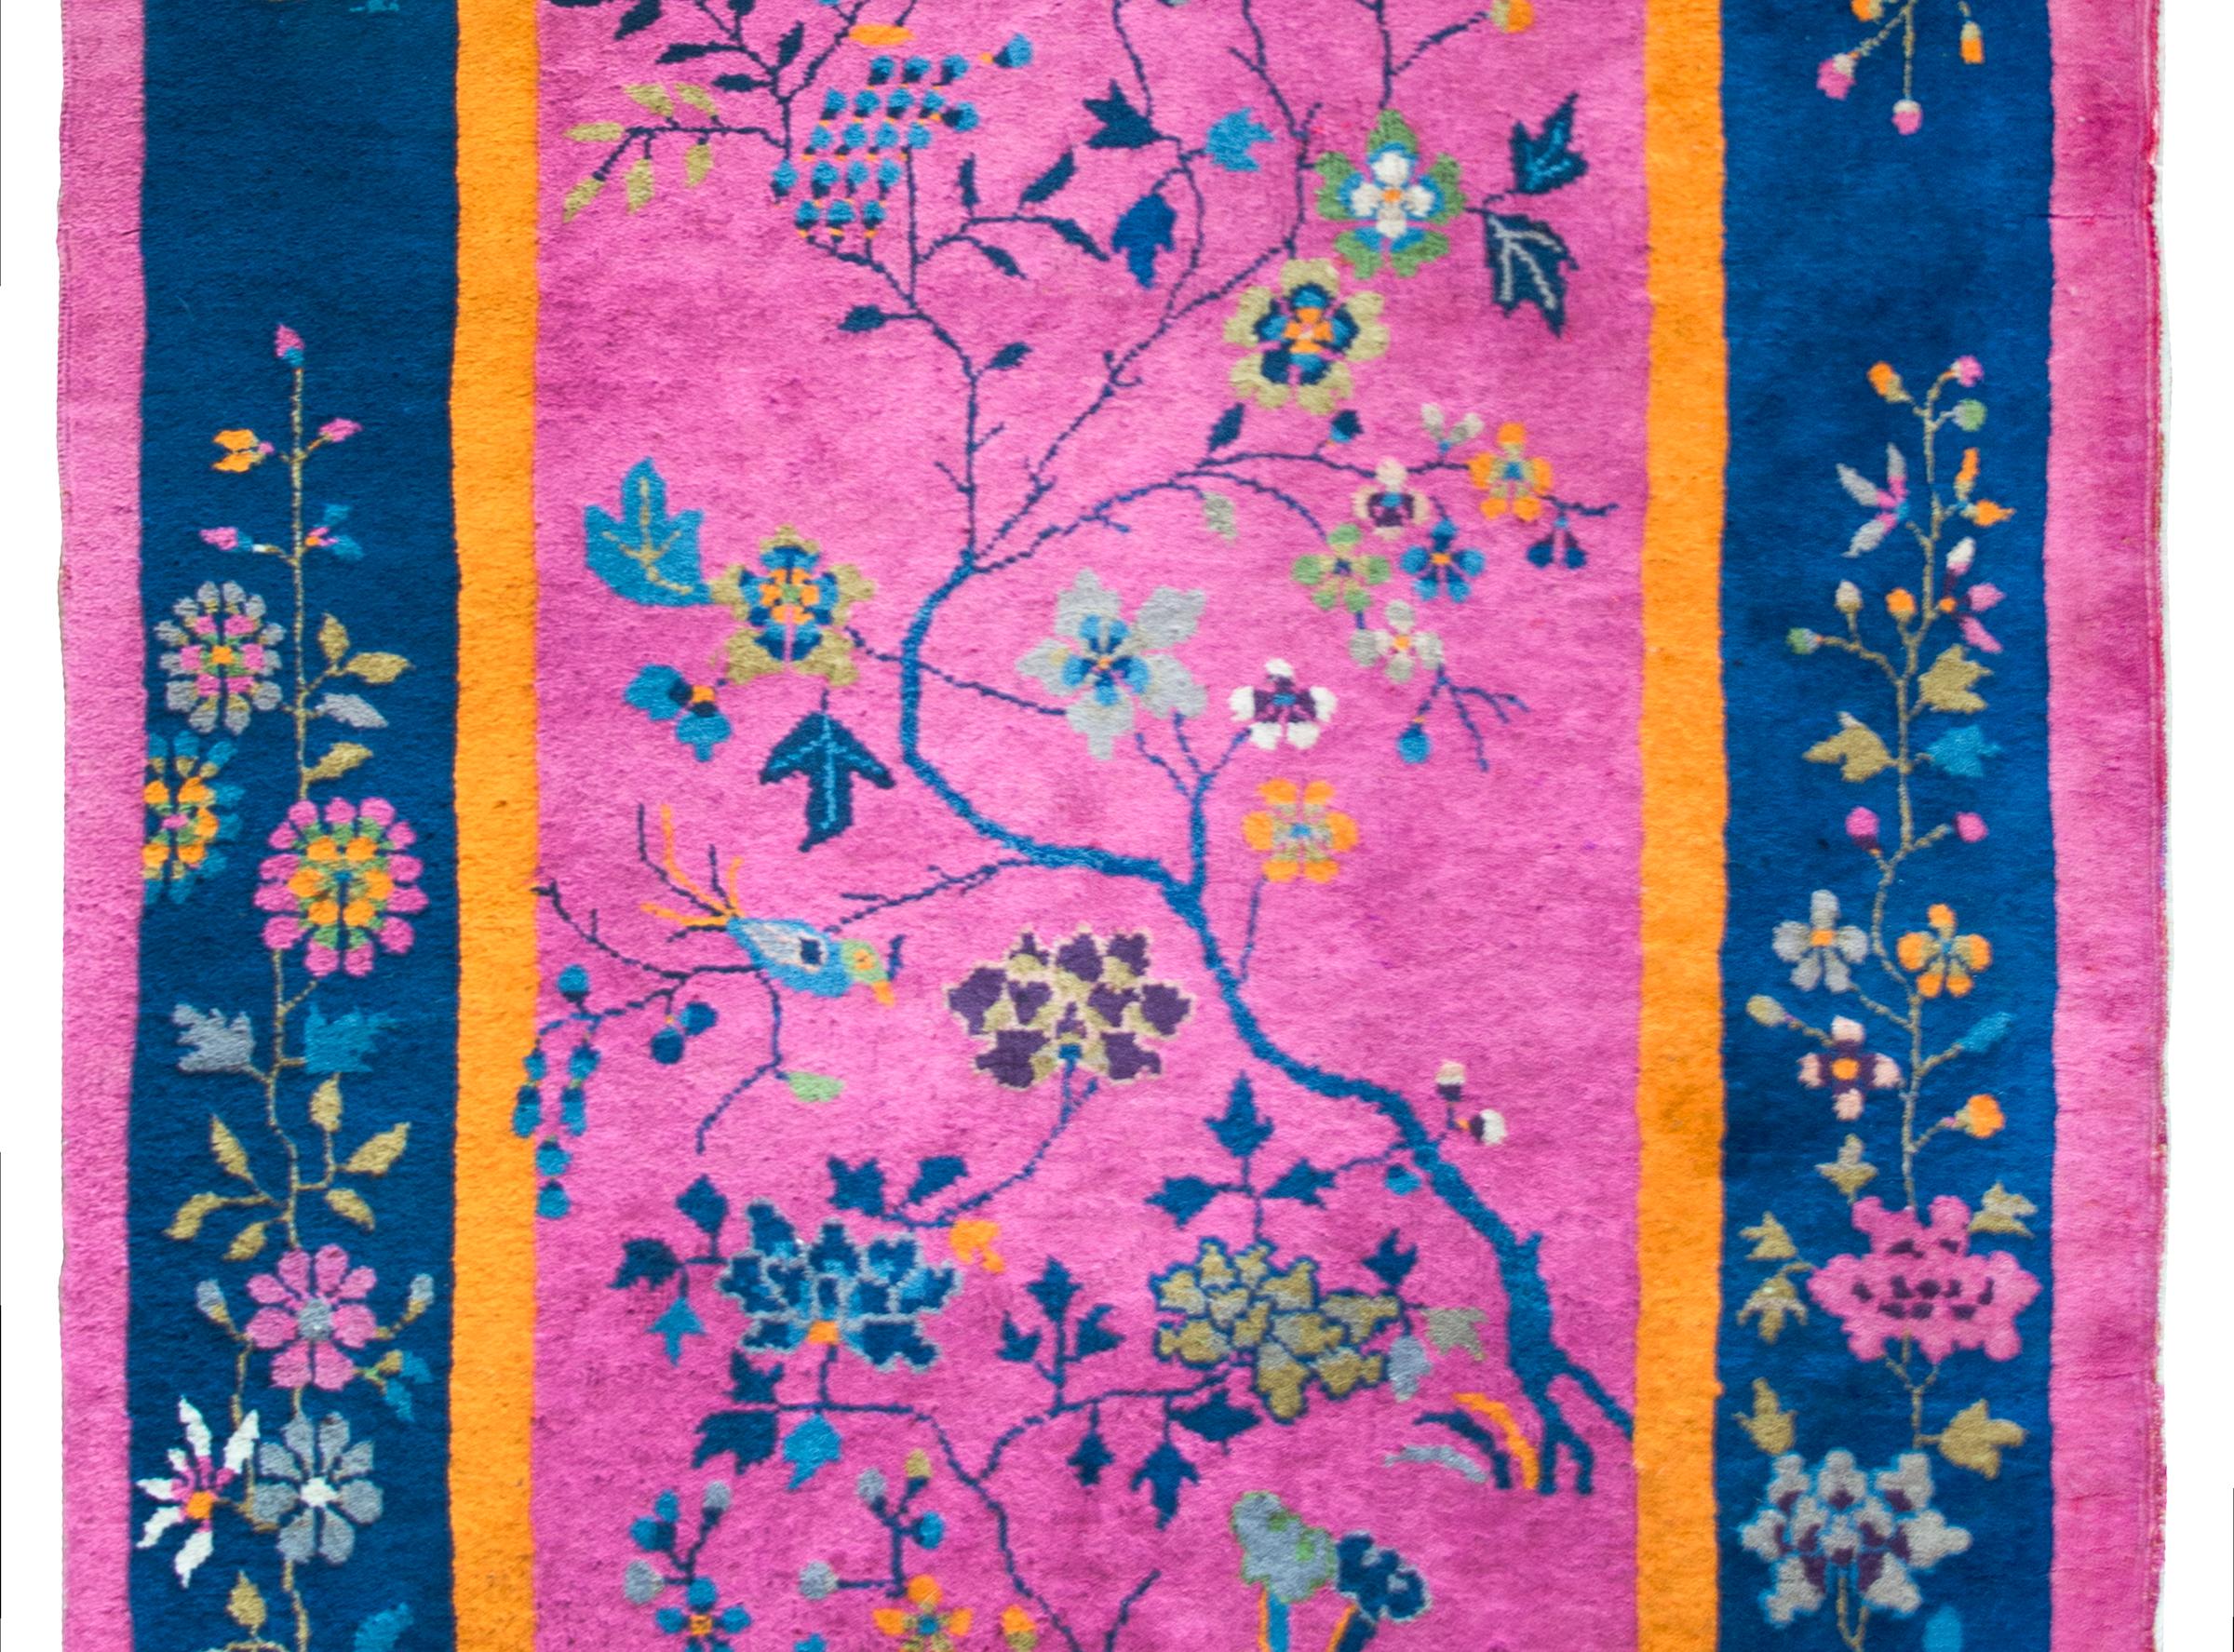 A wonderful early 20th century Chinese Art Deco rug with a brilliant fuchsia field surrounded by thin orange, wide indigo, and thin fuchsia borders, and all overlaid with multi-colored branches with hanging grape clusters, peonies, and cherry